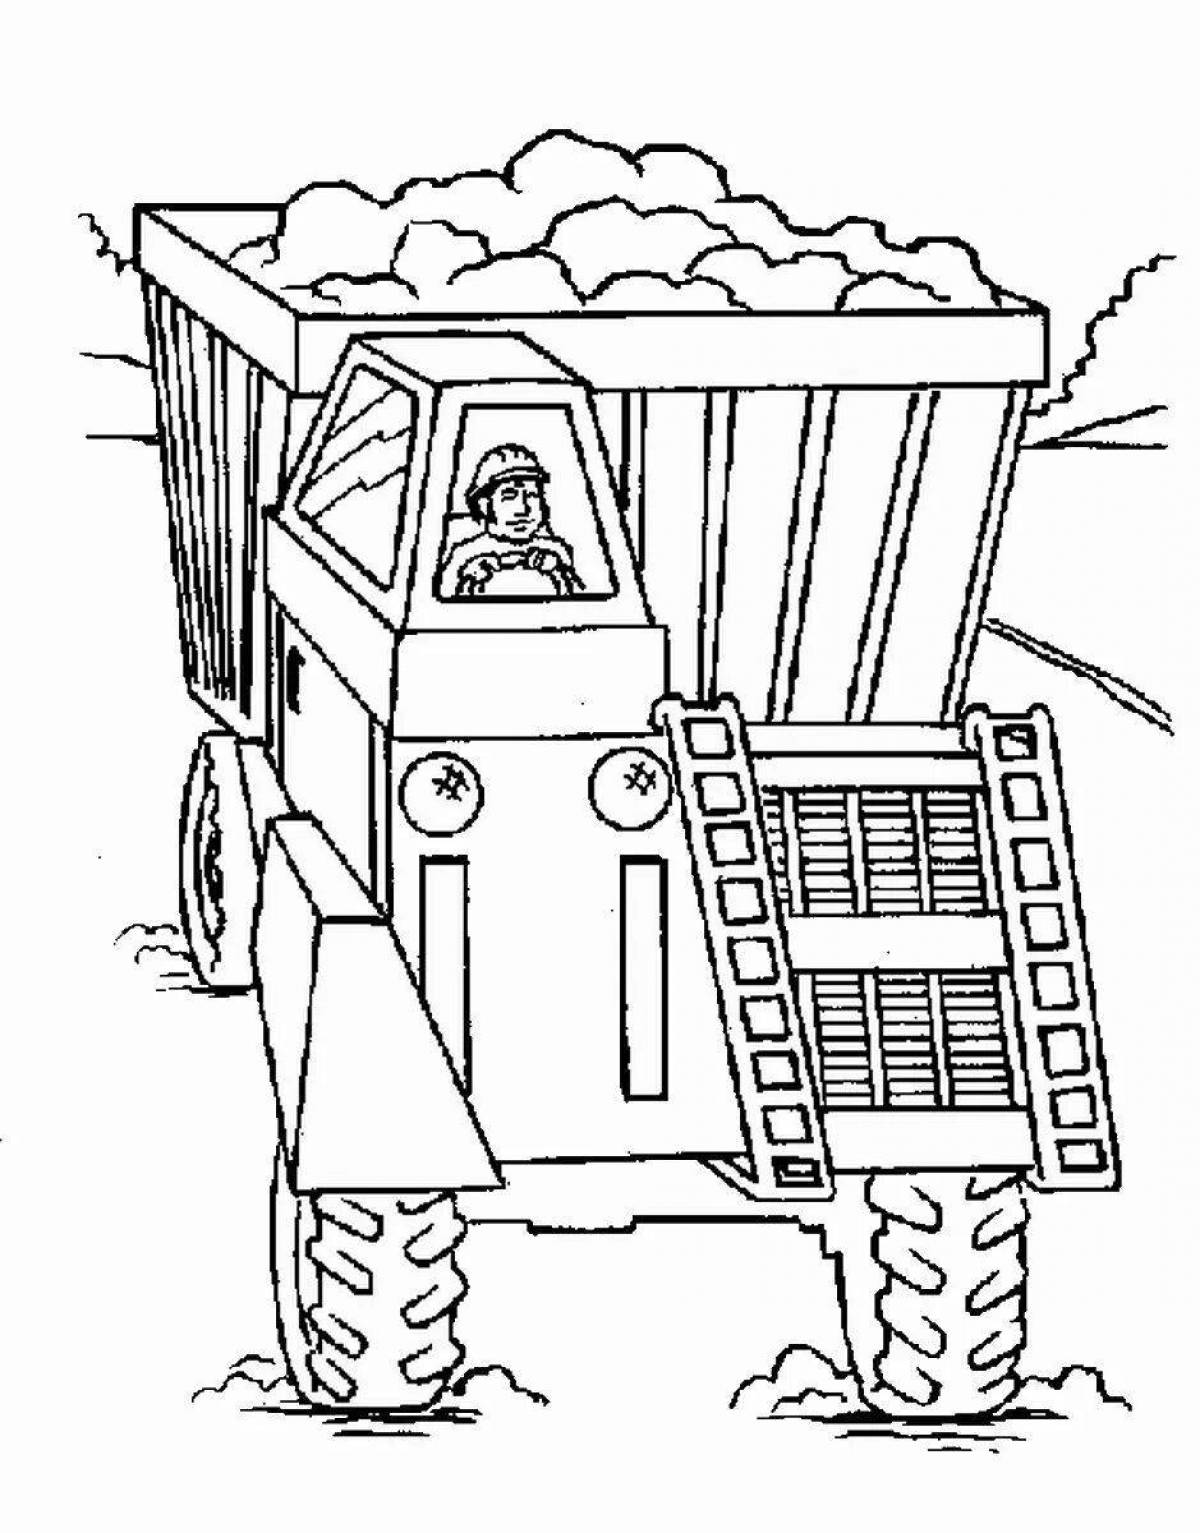 Amazing coloring pages of agricultural machinery for kids